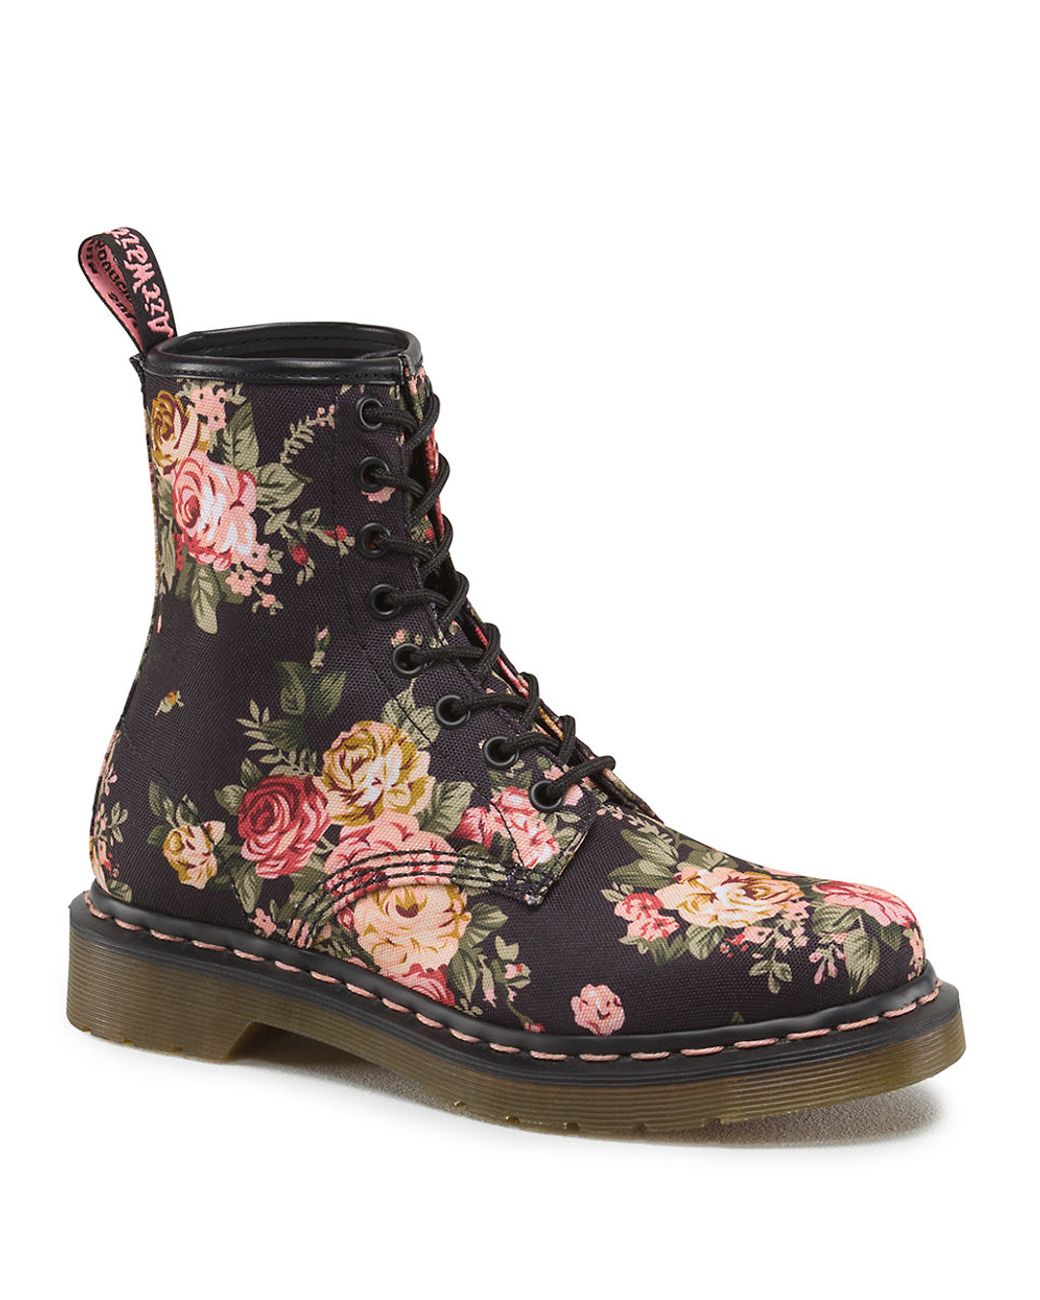 Dr. Martens Canvas 1460 W Floral Printed Boots in Black | Lyst